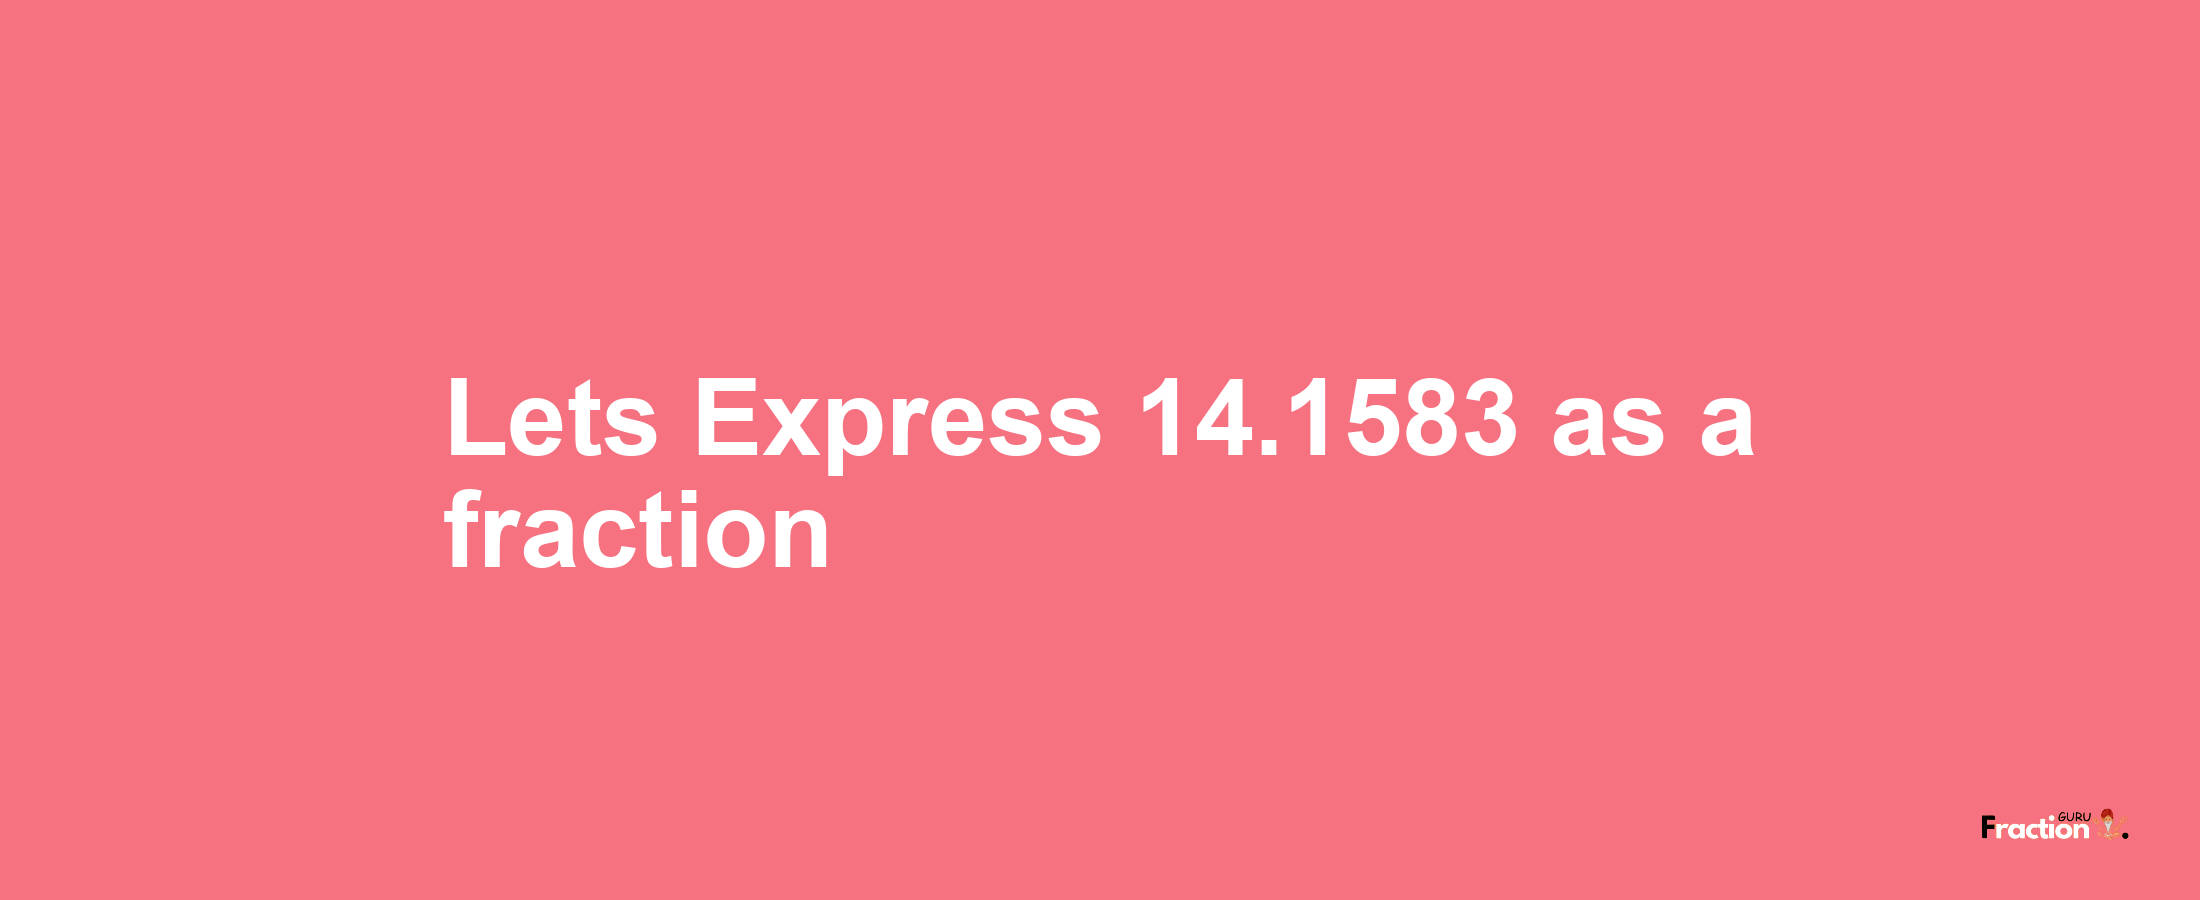 Lets Express 14.1583 as afraction